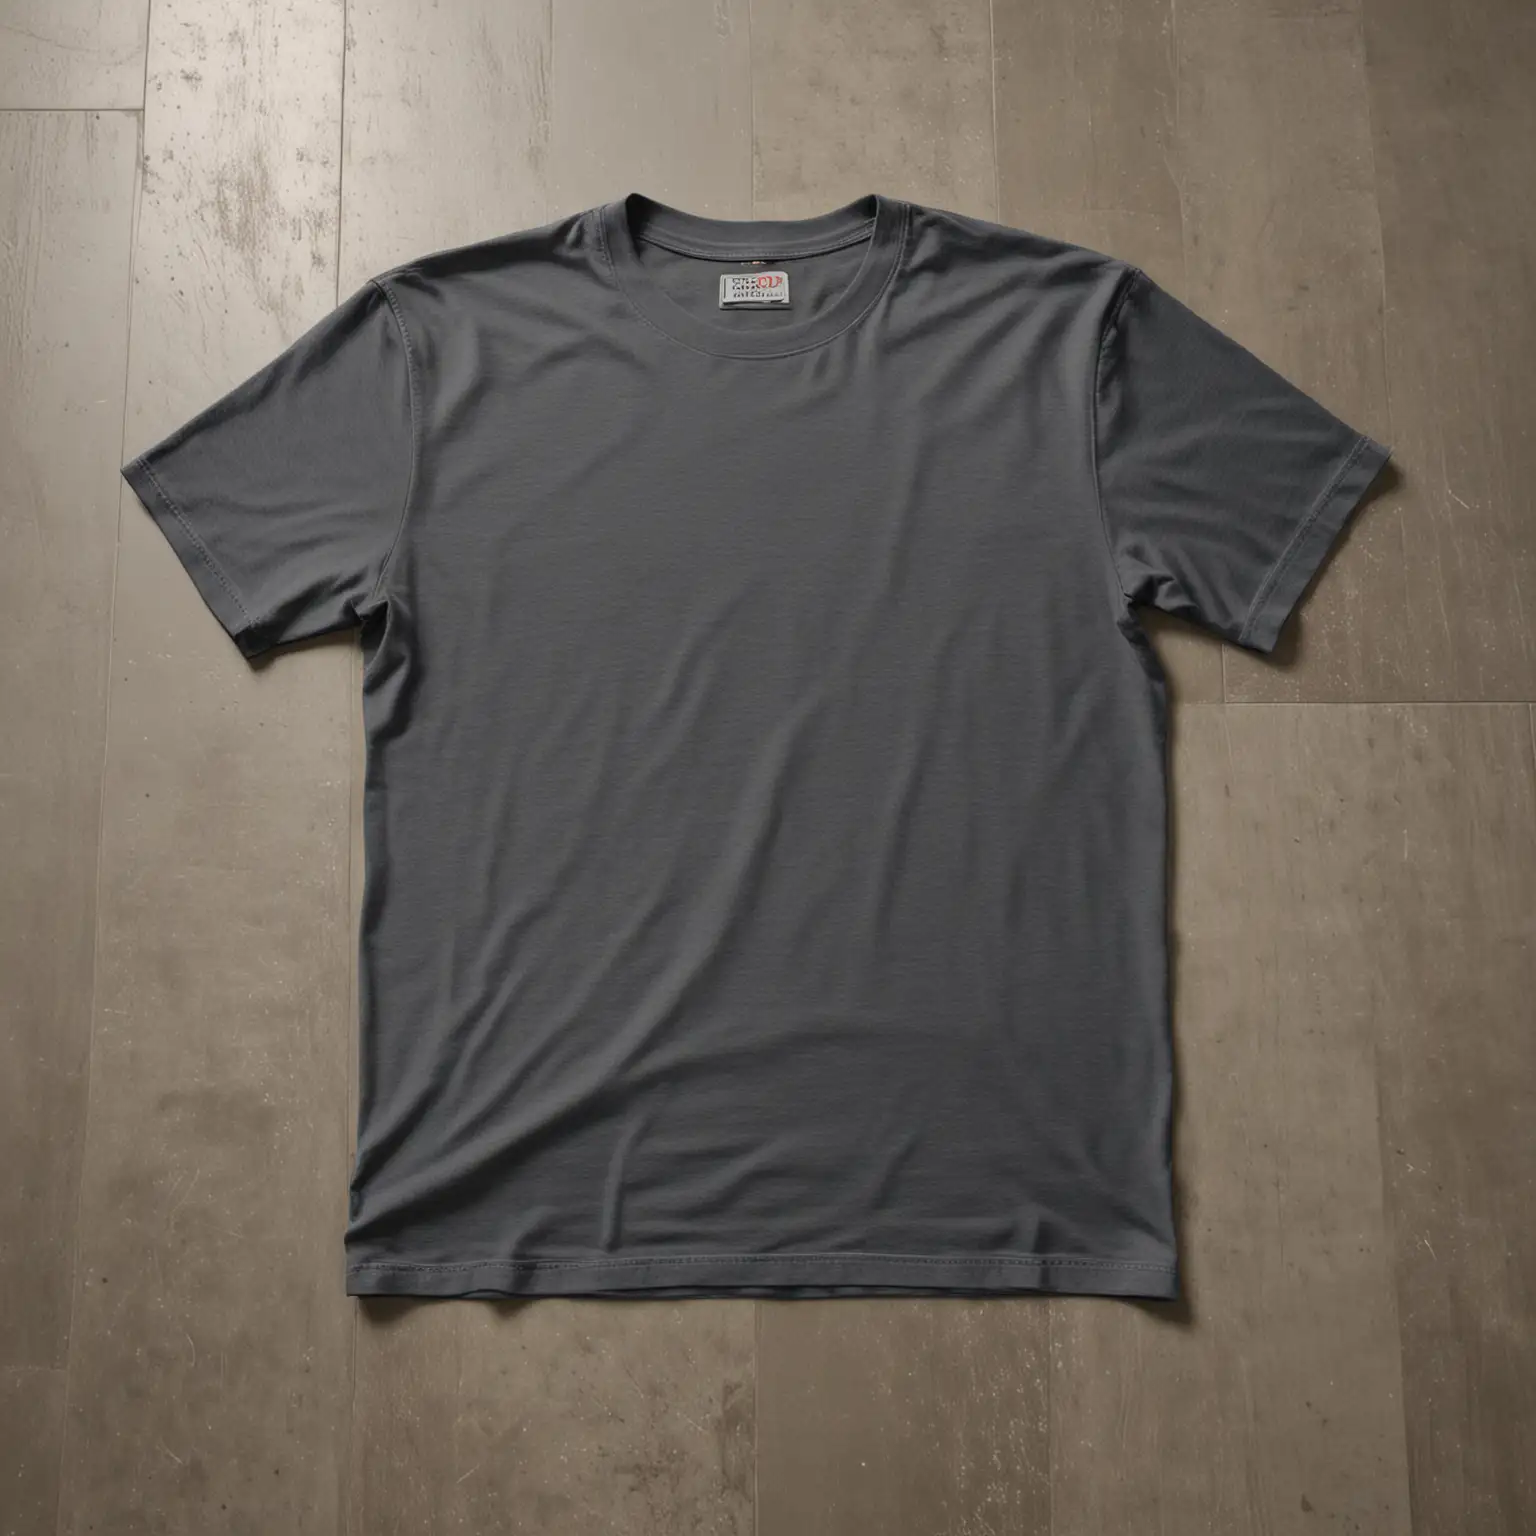 HYPER REALISTIC textured ironed simmetrical proportional 100% cotton bella canvas 3001 asphalt tshirt no wrinkles, lied on floor seen from above with solid contrasting background floor